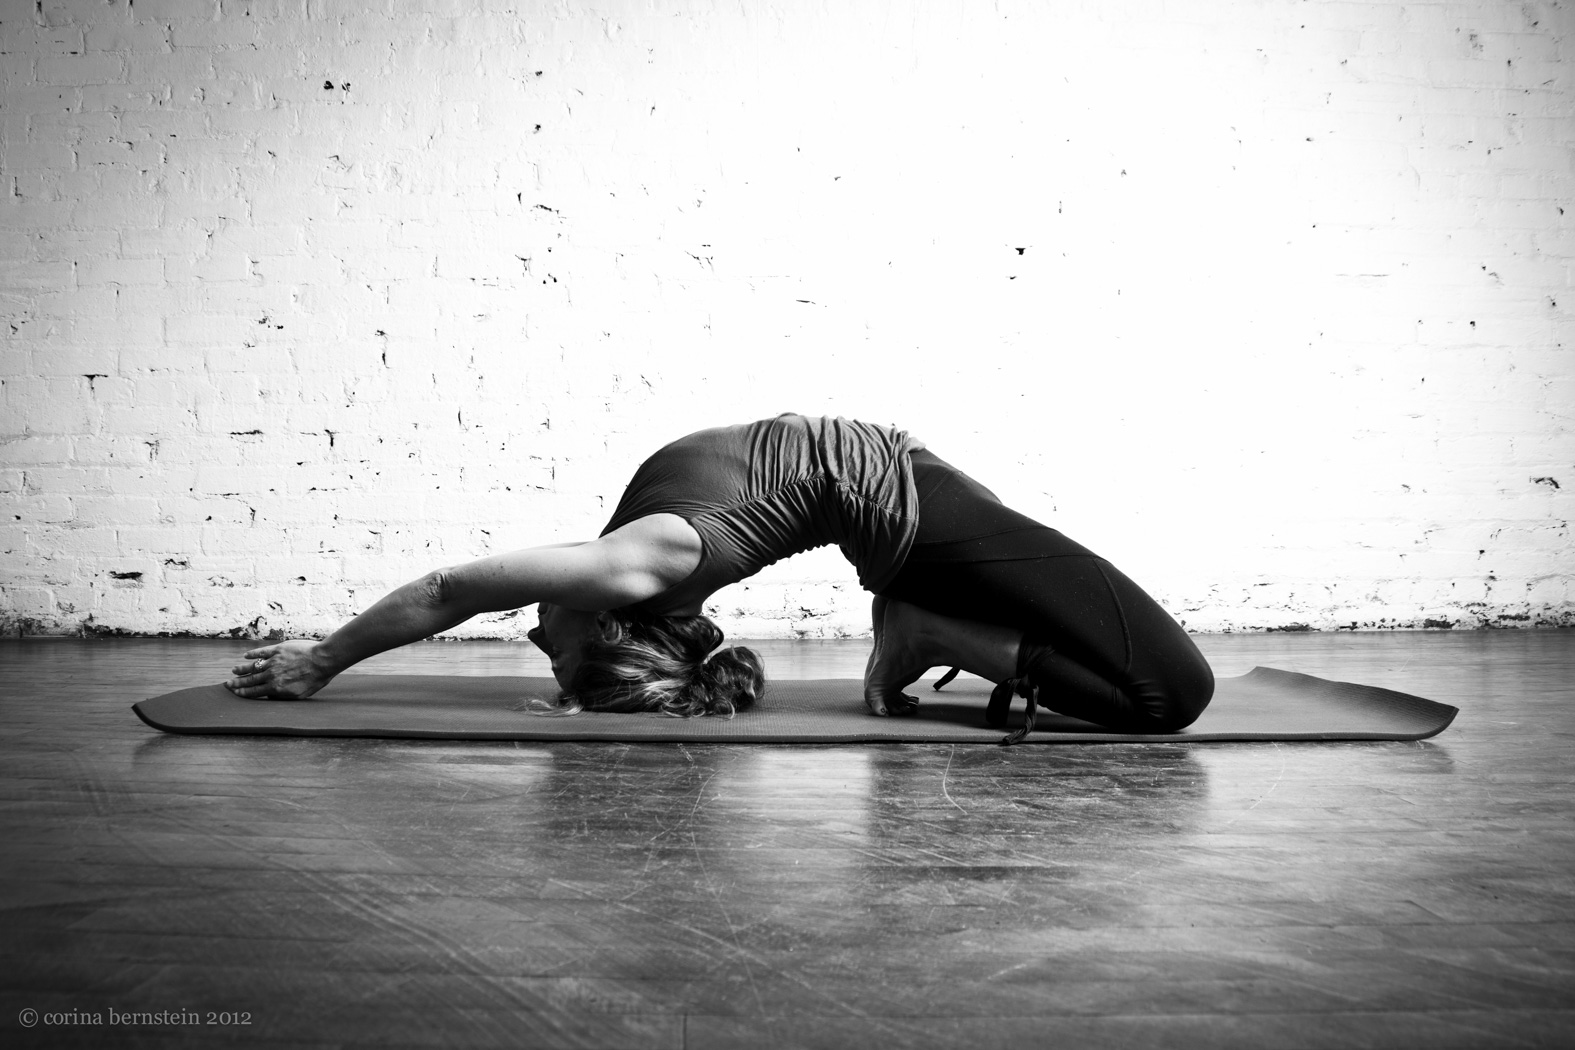 Black and white portrait of a woman doing a yoga pose